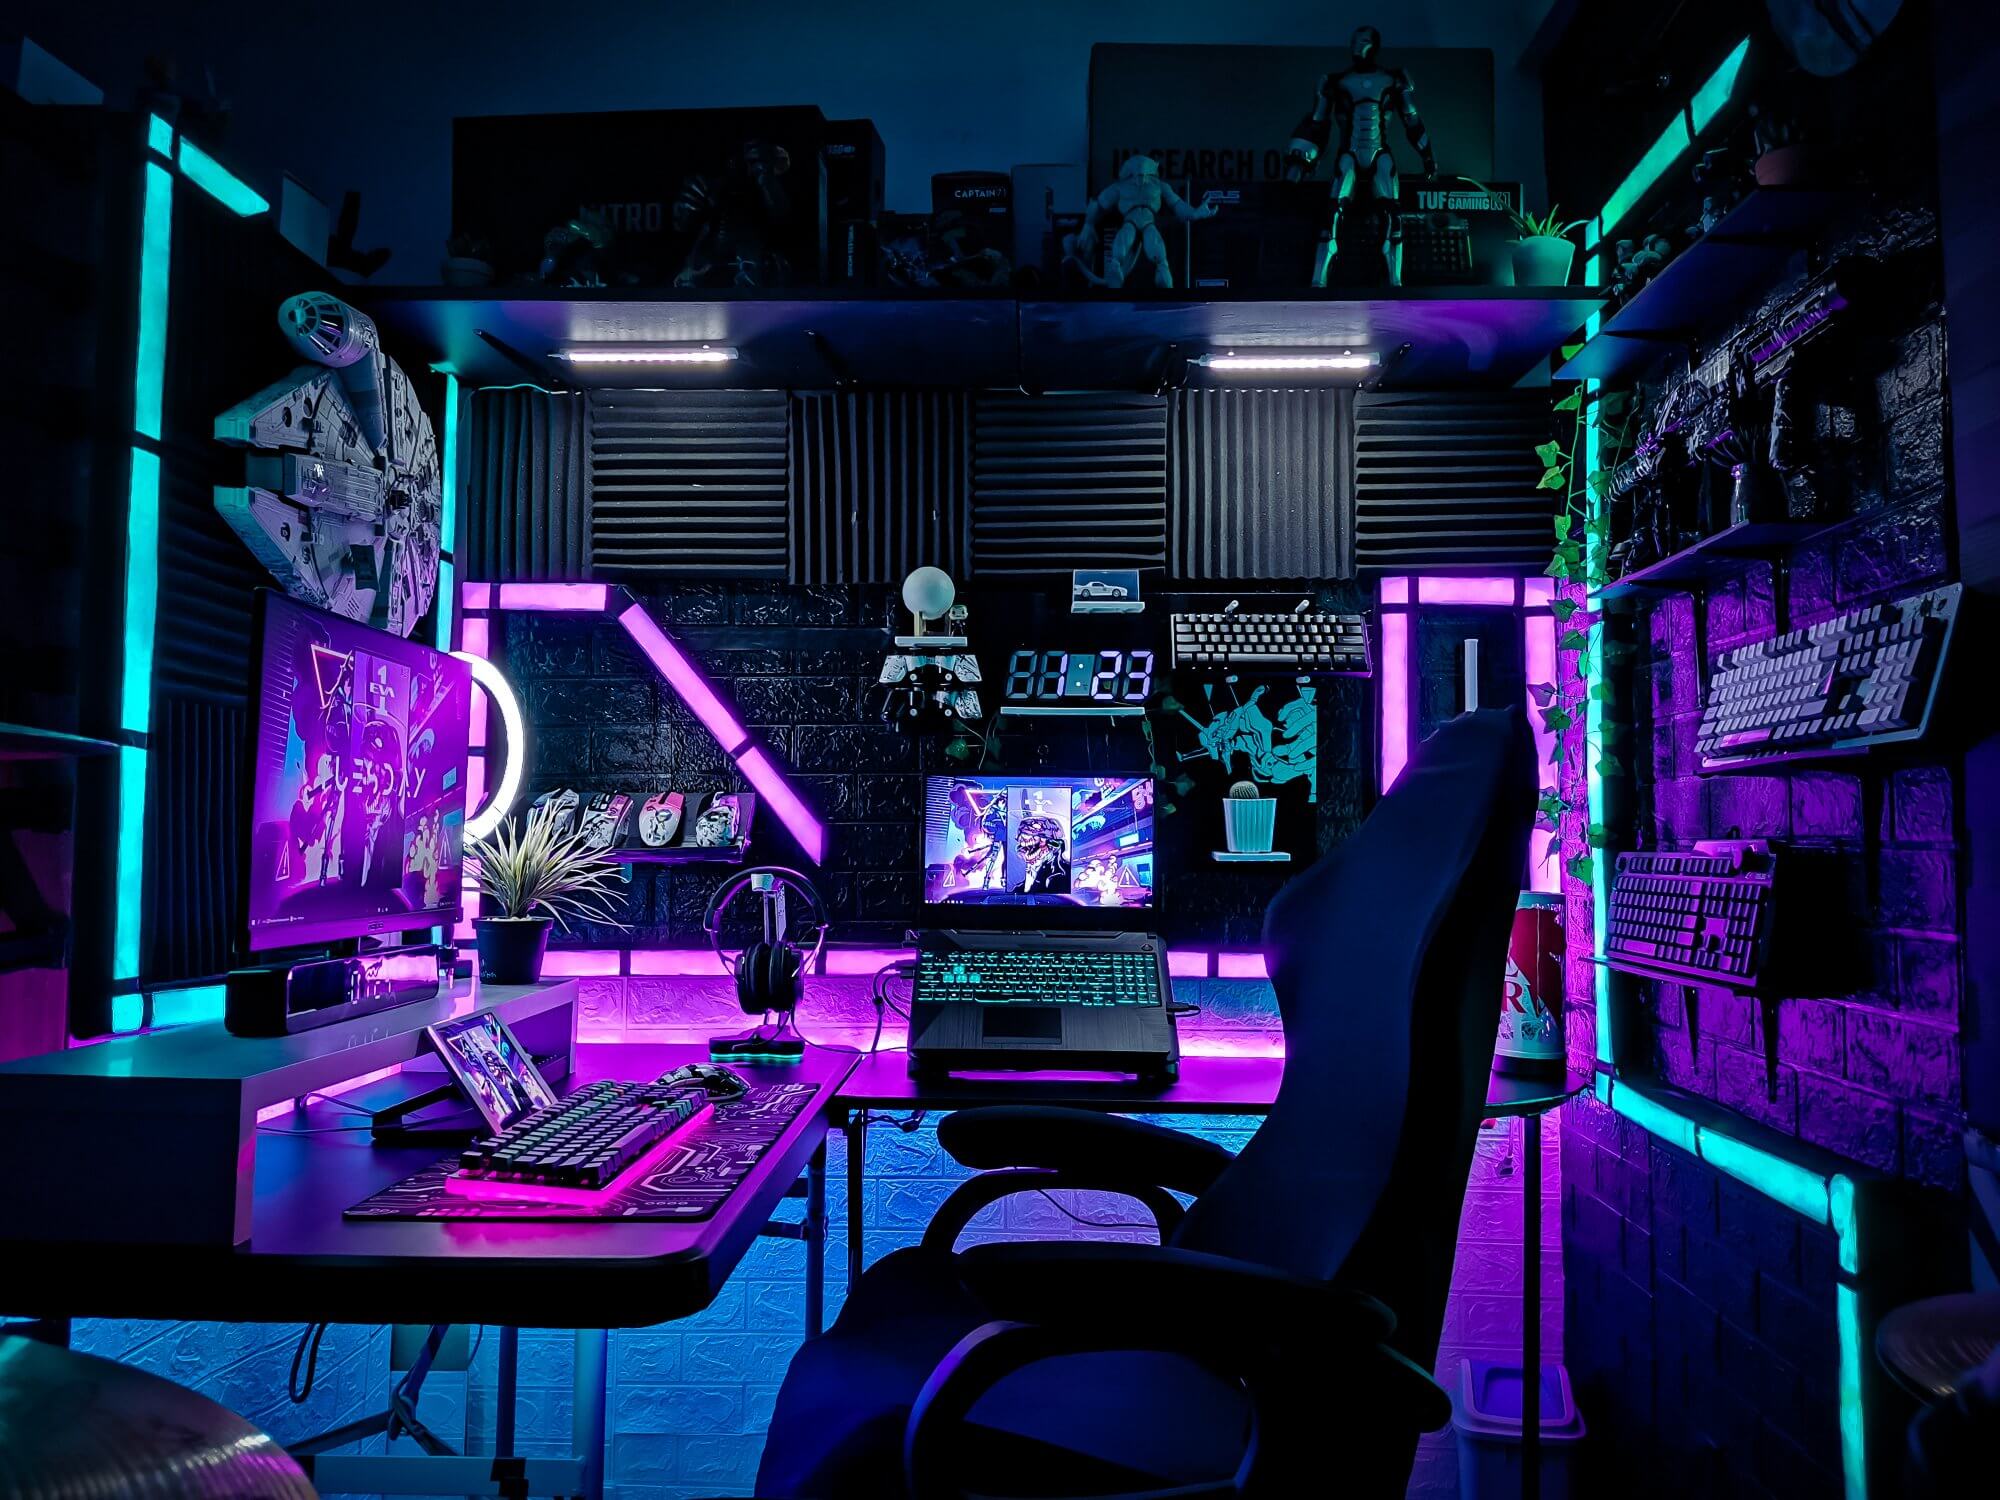 Cyberpunk-Inspired RGB Gaming Setup in the Philippines